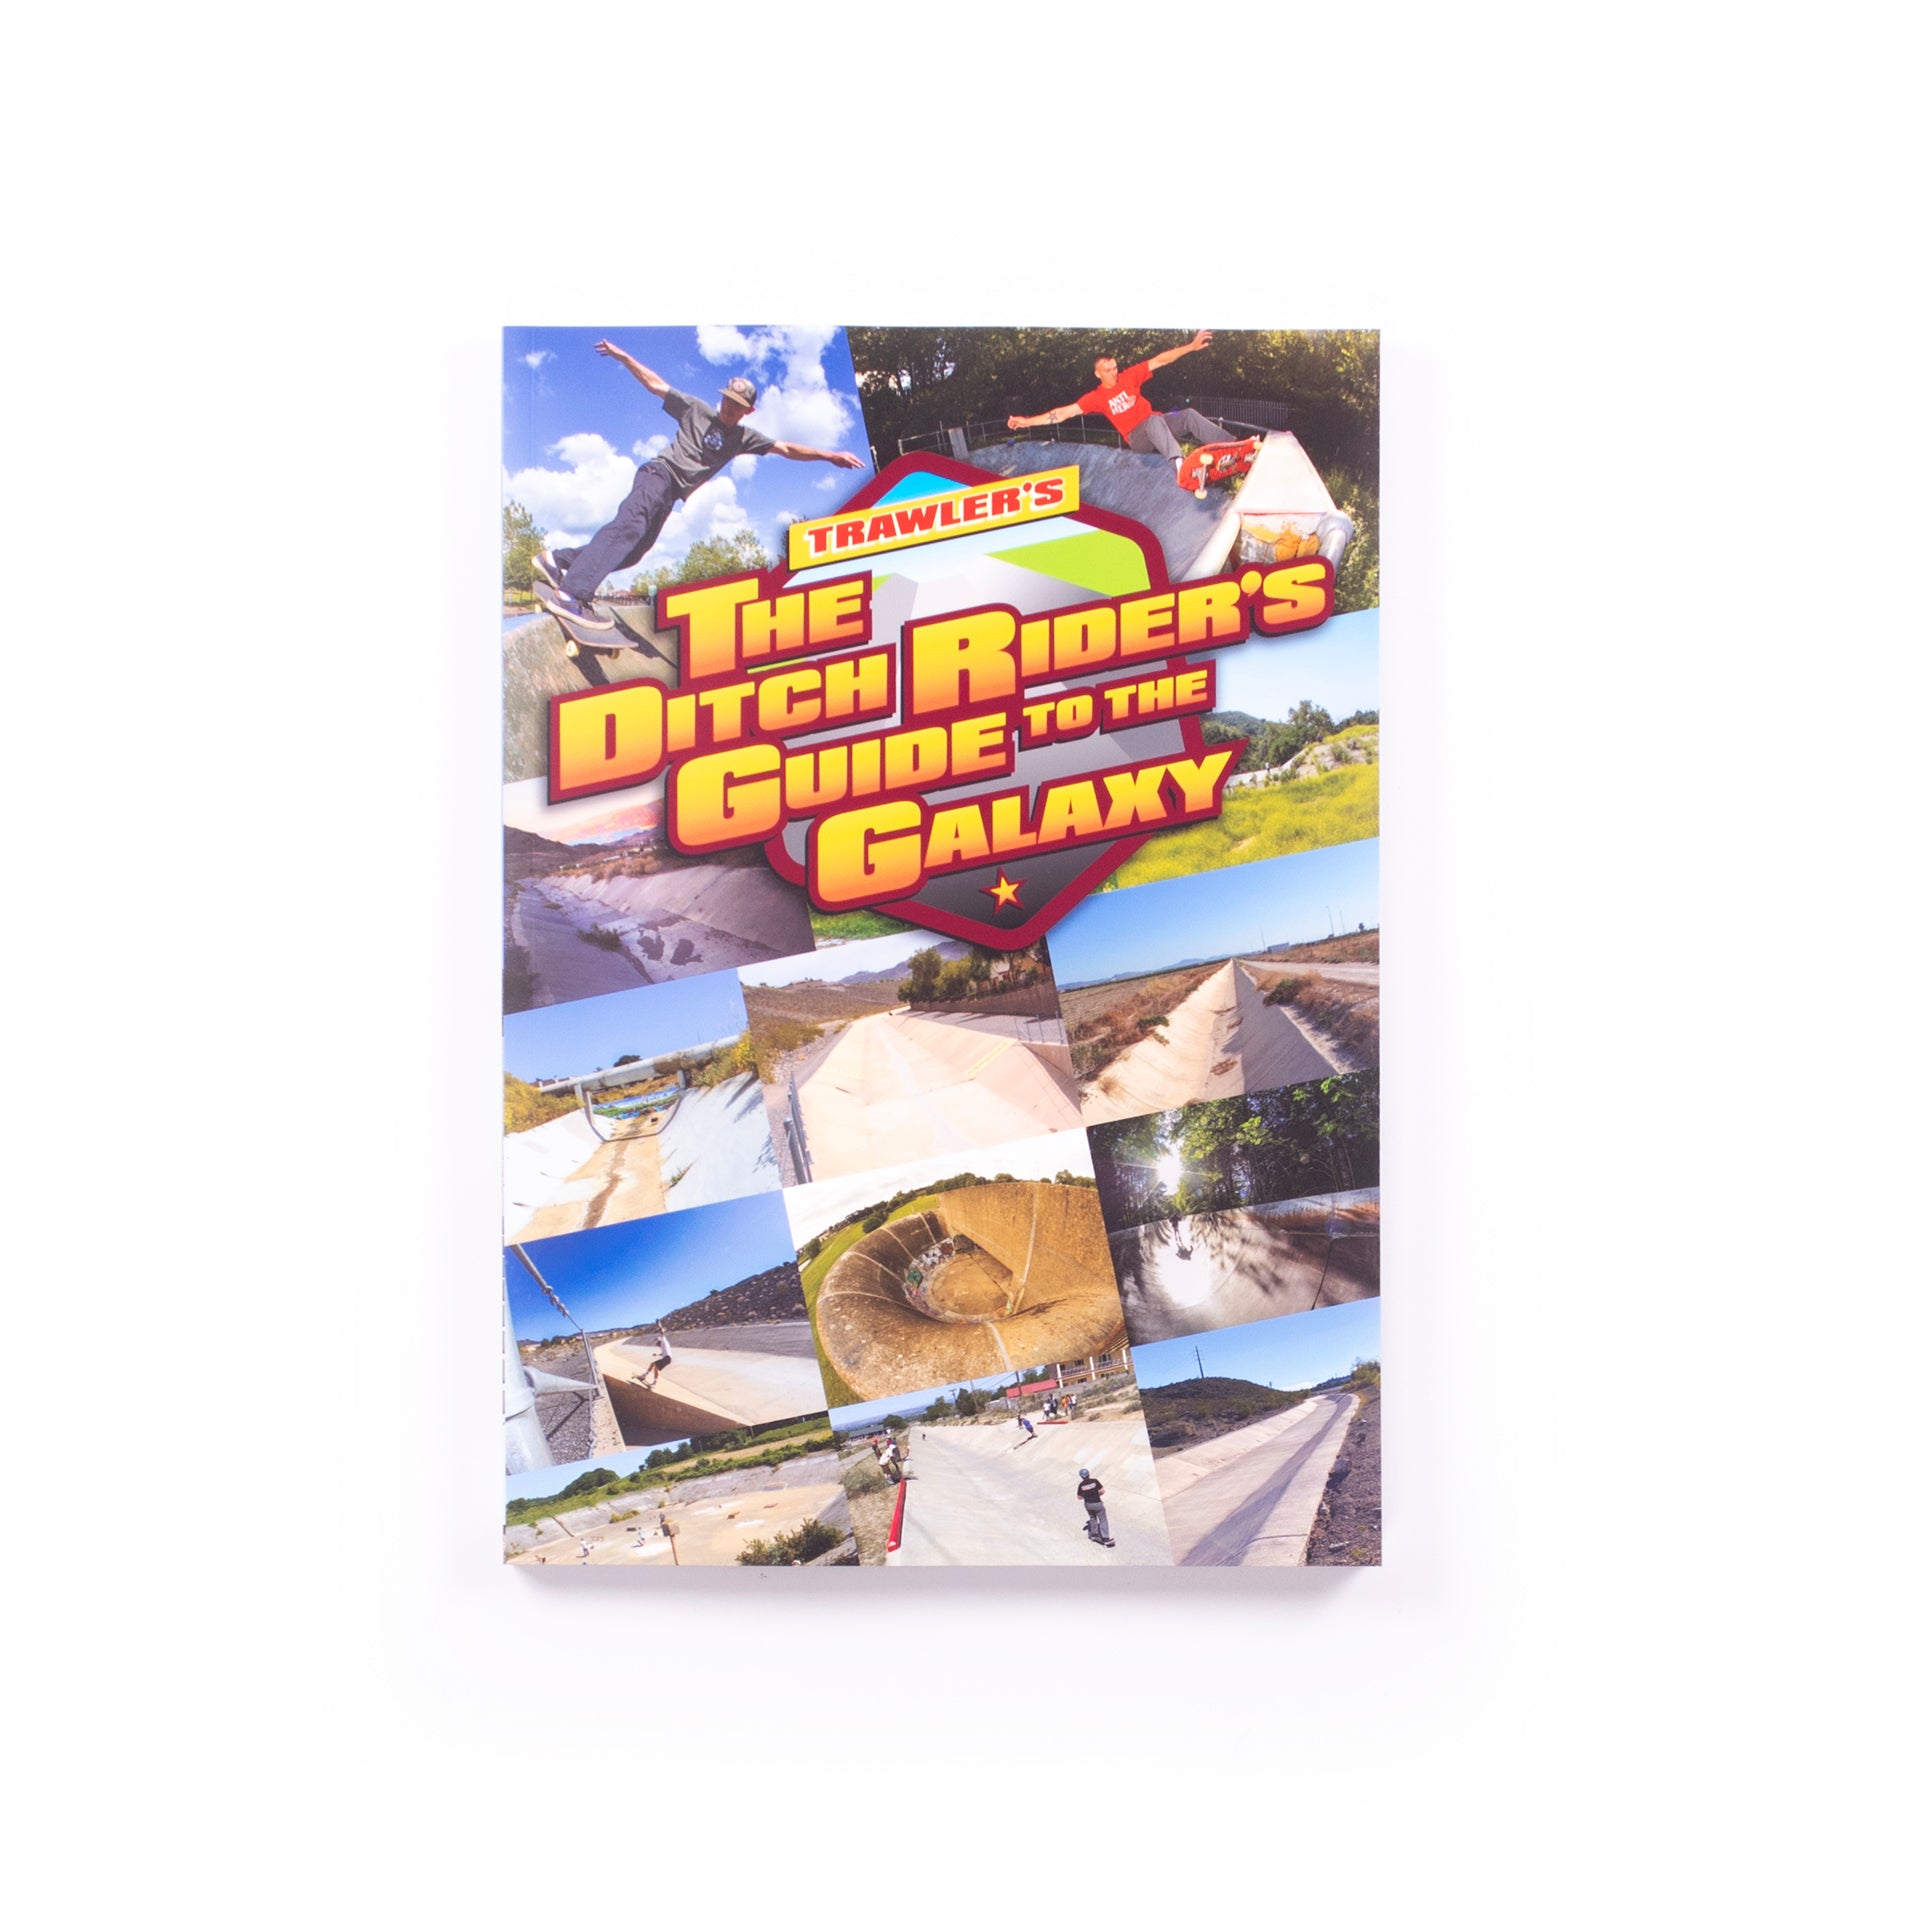 The Ditch Riders Guide to the Universe - Prime Delux Store